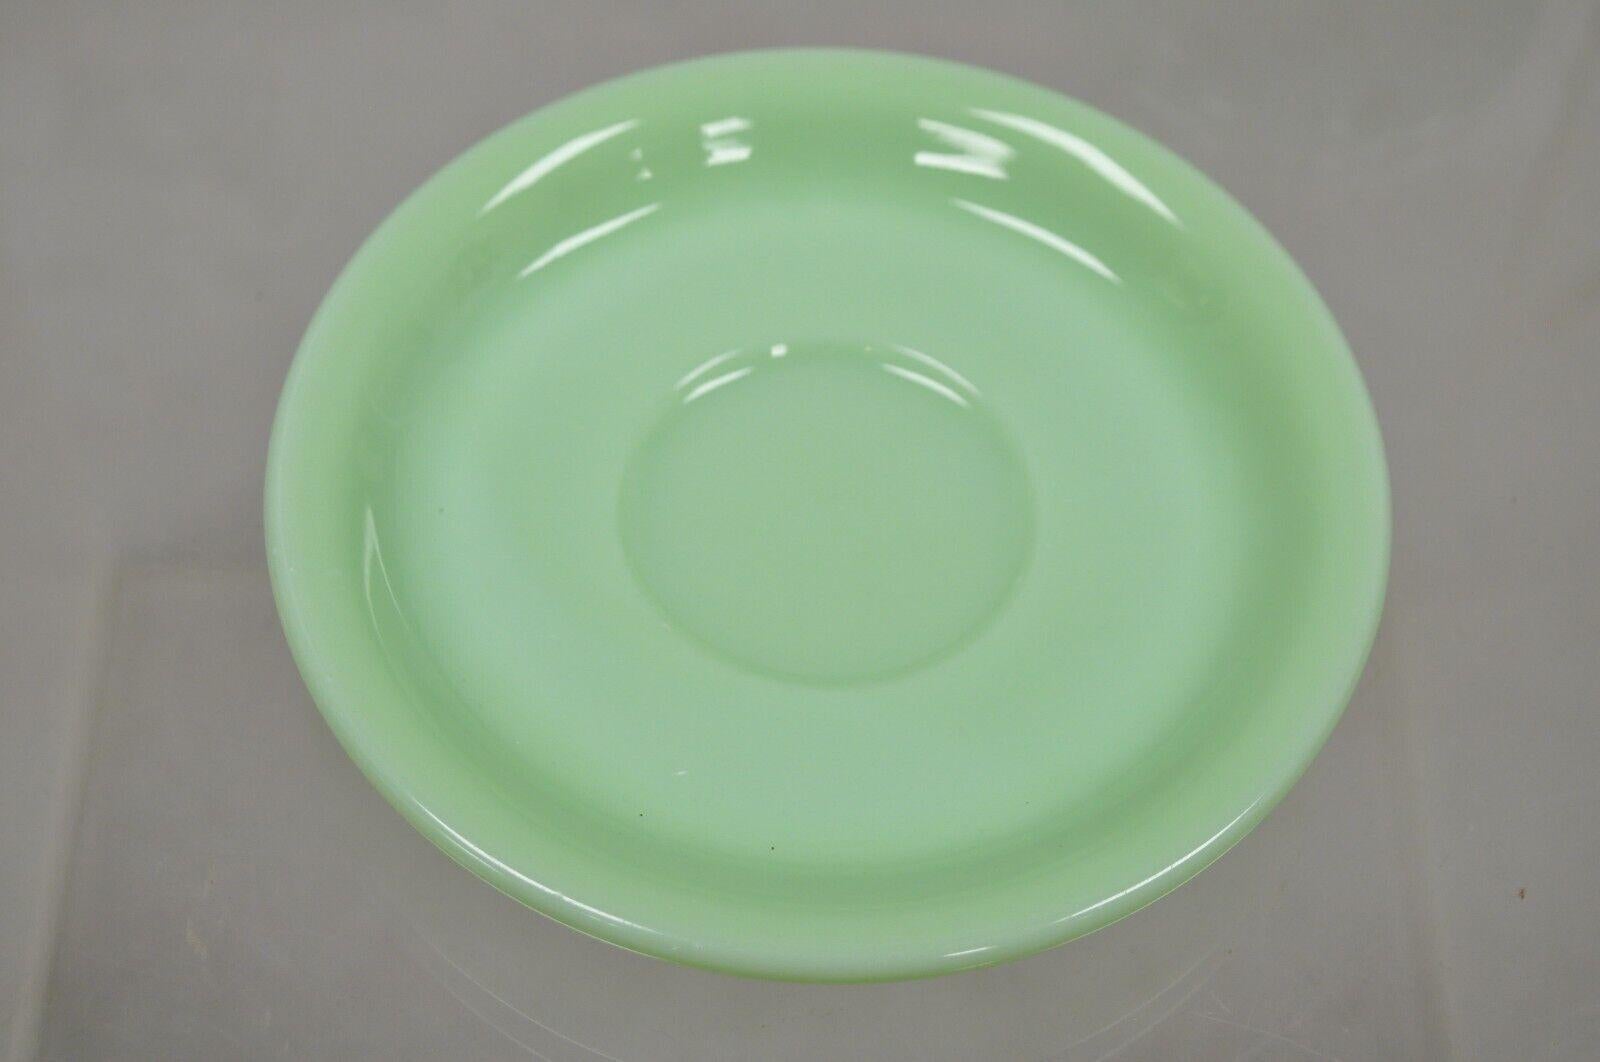 20th Century Vintage Fire King Jadeite Green Oven Ware Coffee Cup and Saucer - Set of 4